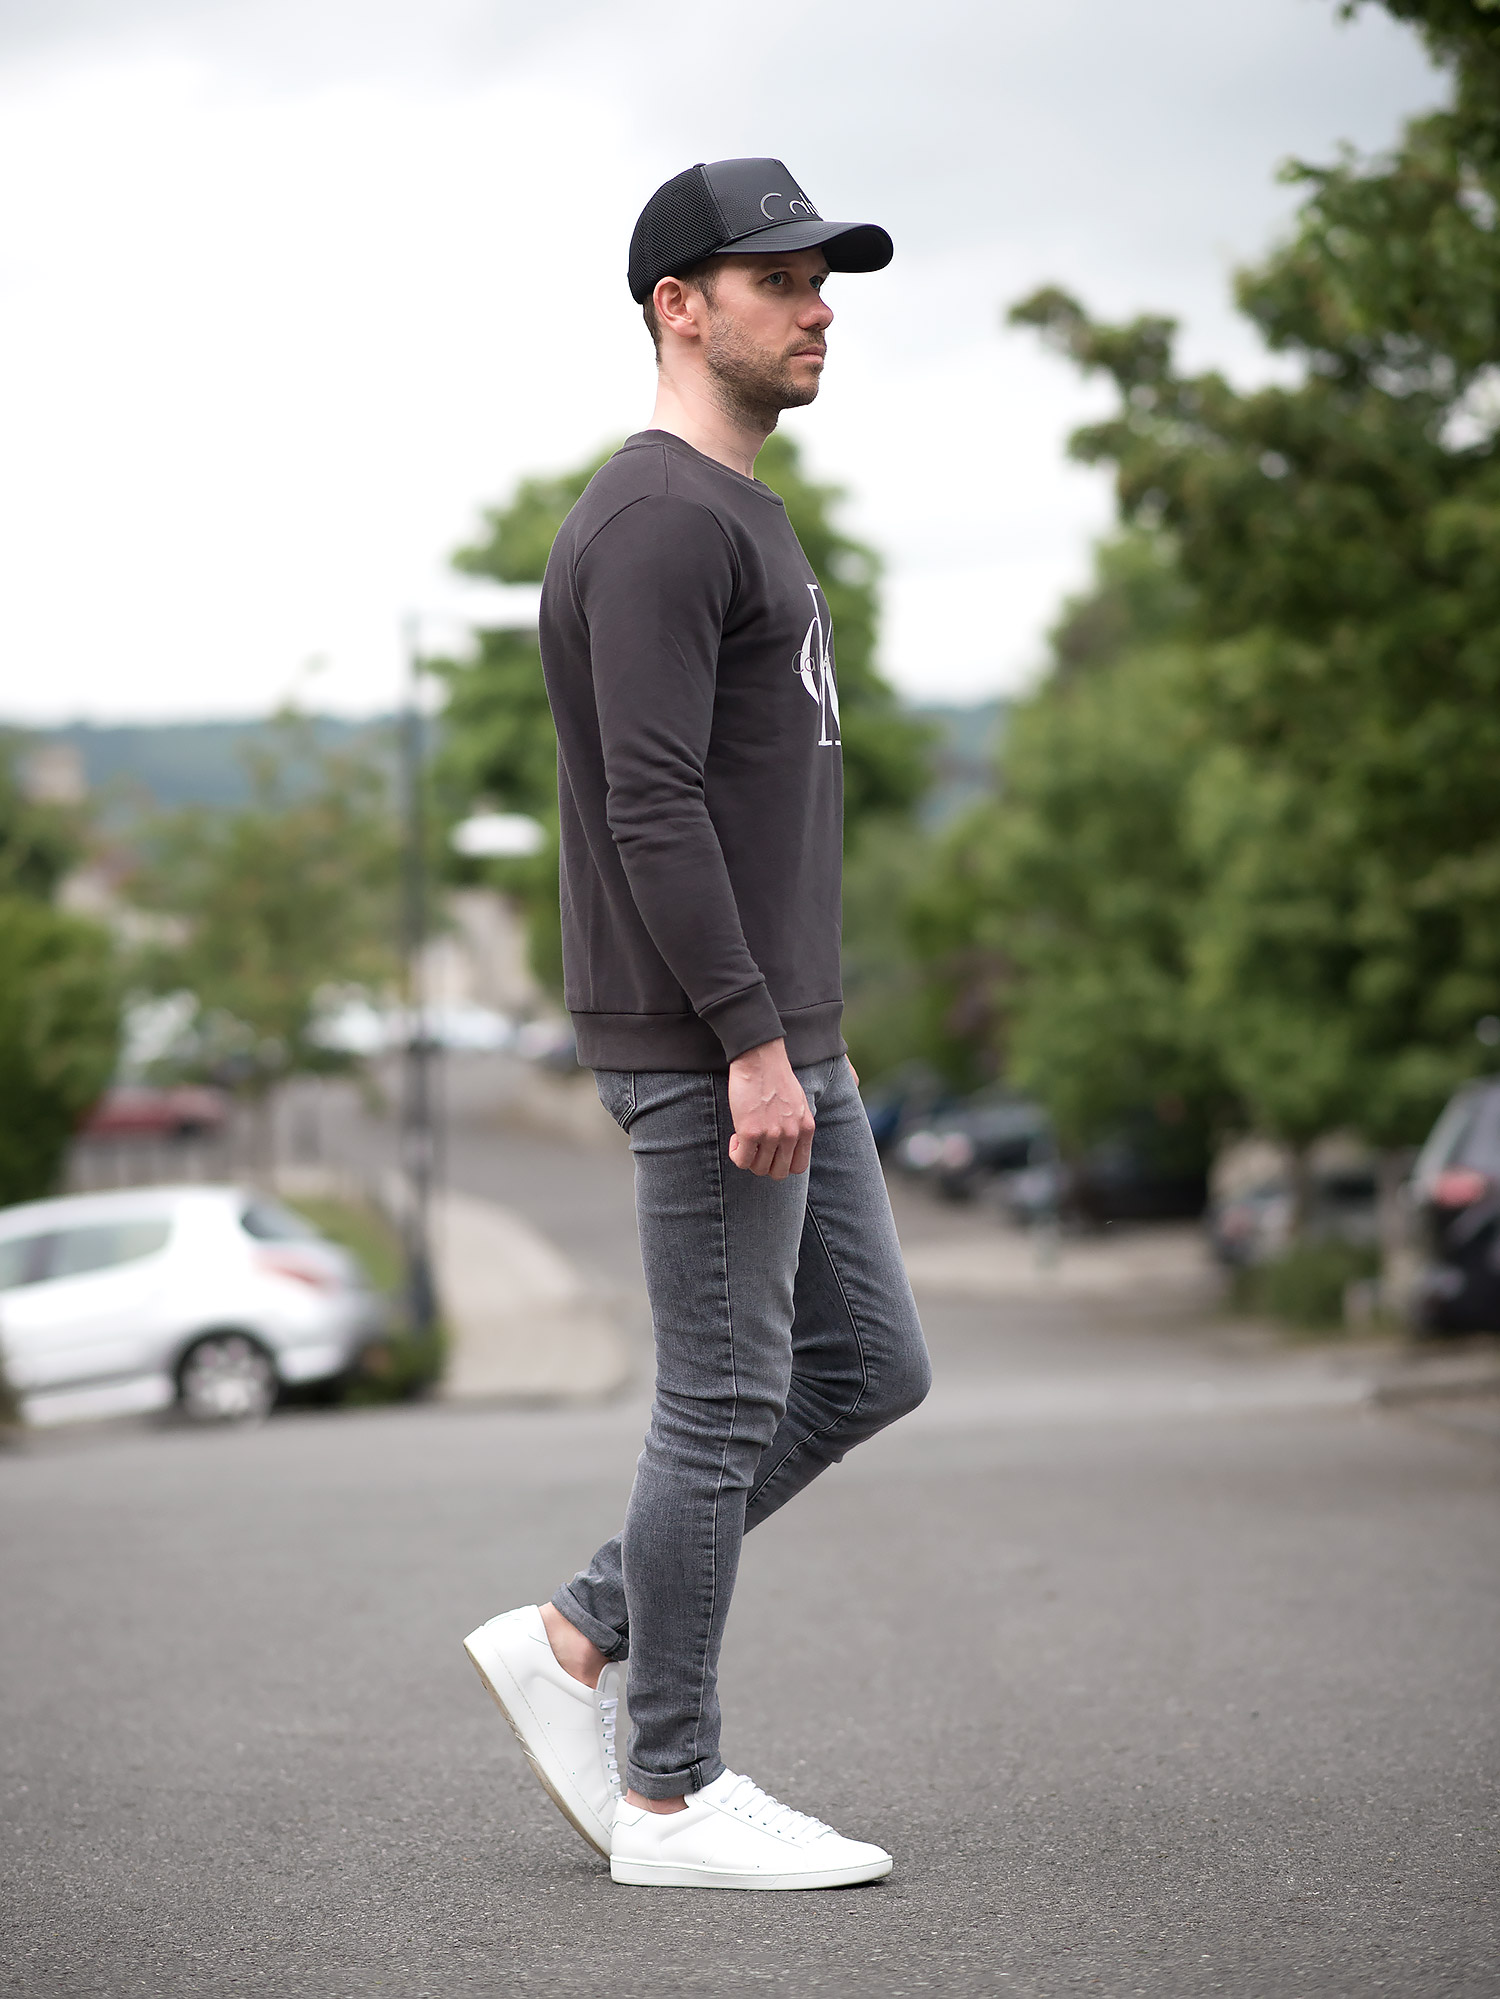 Calvin Klein Sweatshirt And J Brand Grey Skinny Jeans Outfit | Your Average  Guy